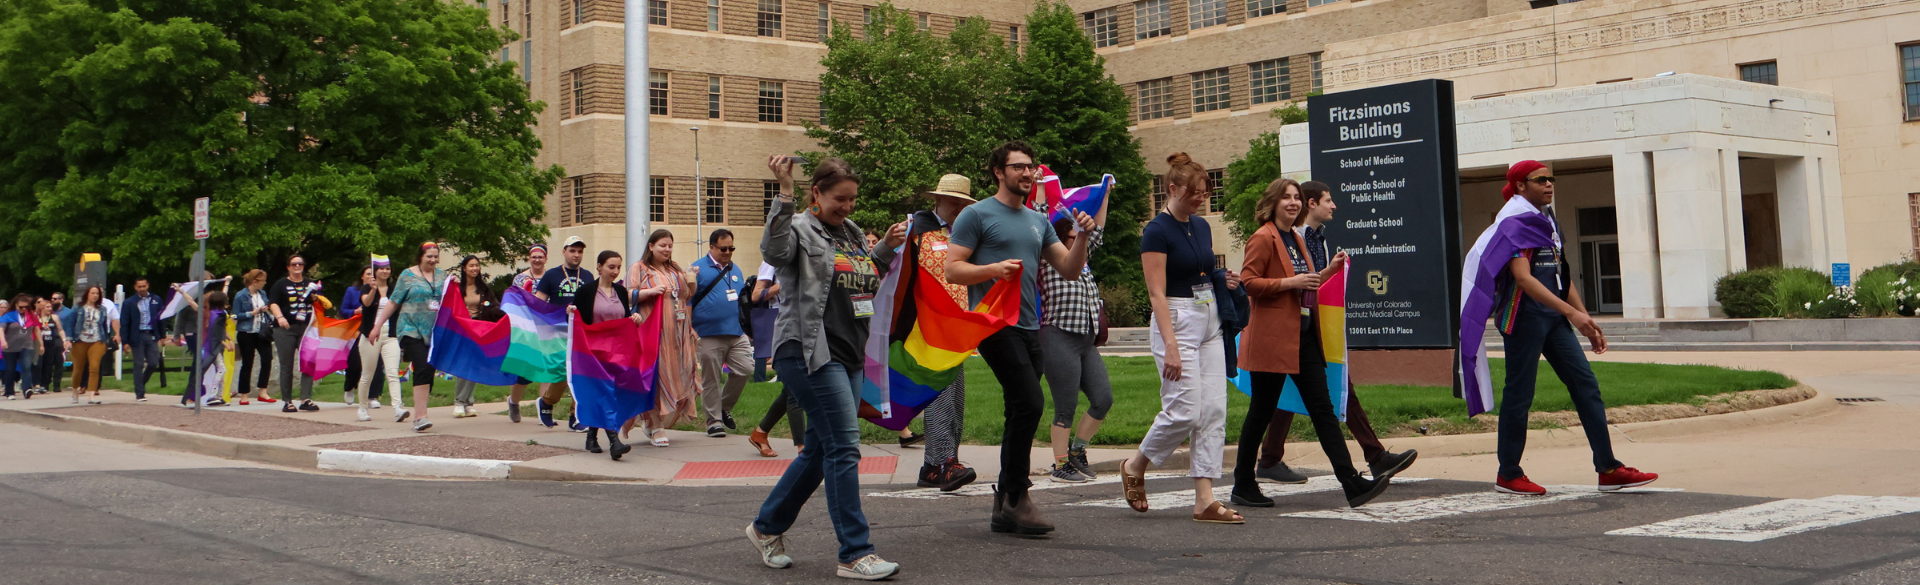 Students, faculty and staff march in Pride Parade on CU Anschutz campus